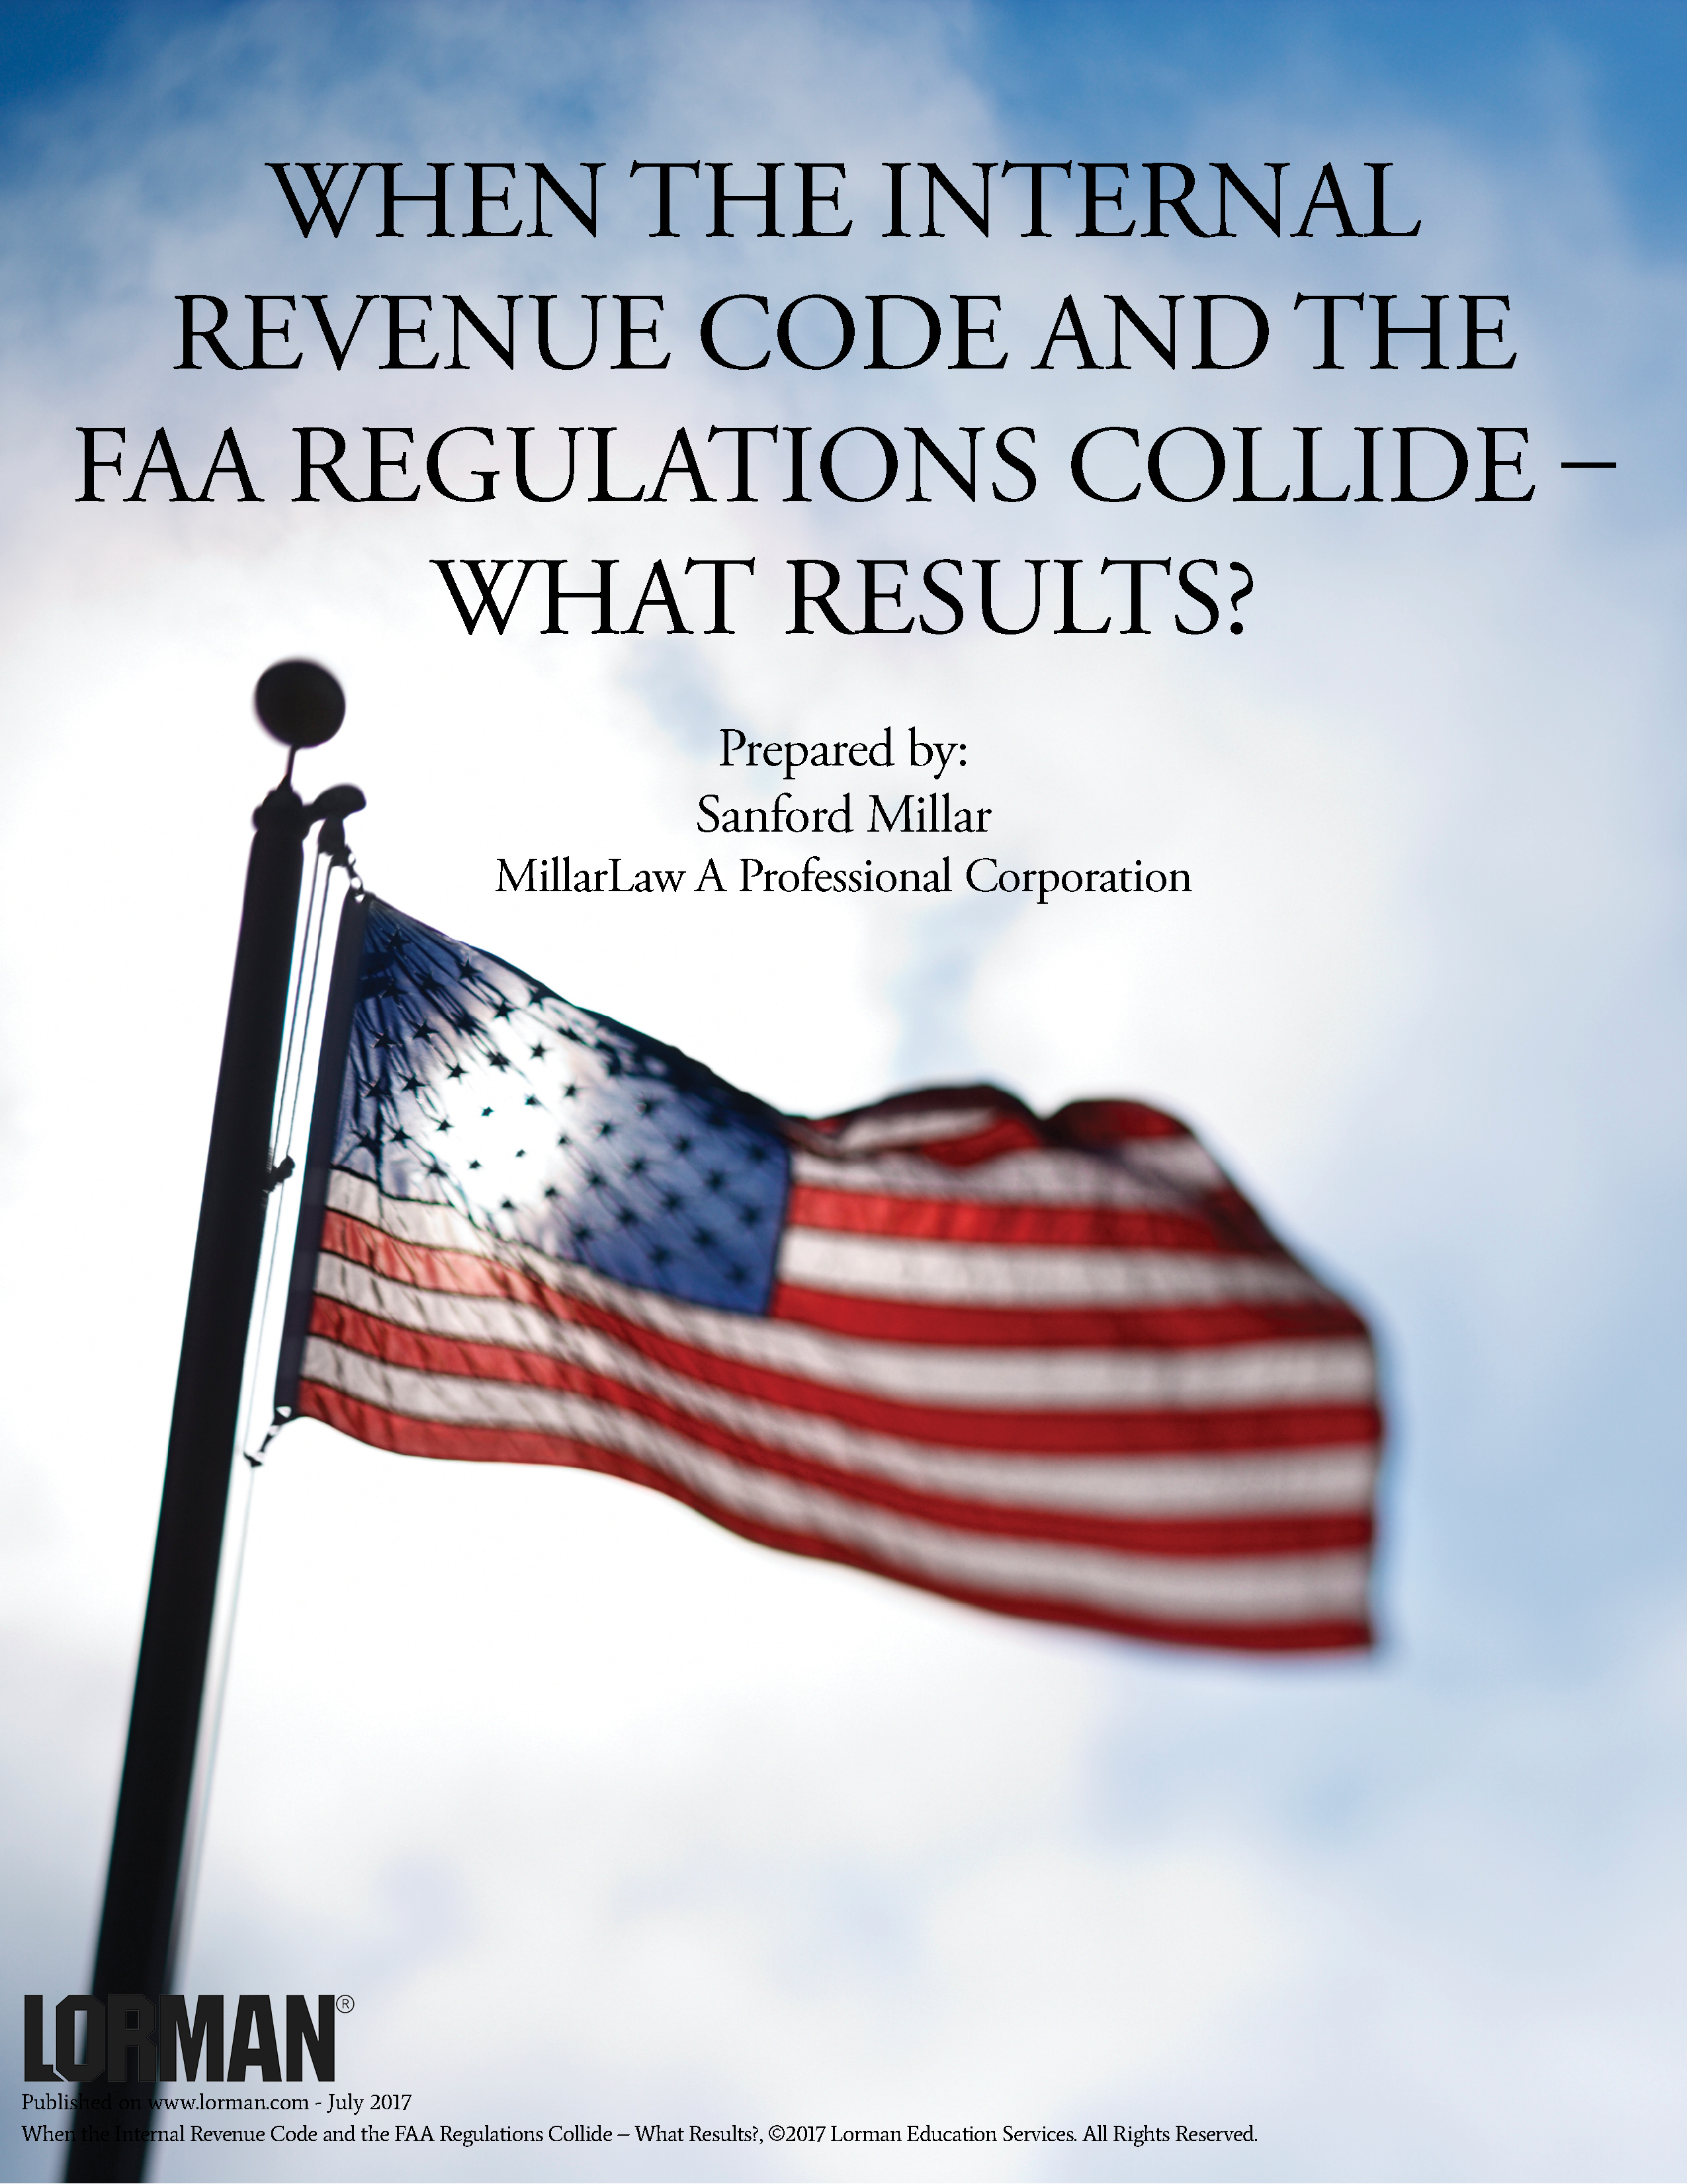 When the Internal Revenue Code and the FAA Regulations Collide – What Results?